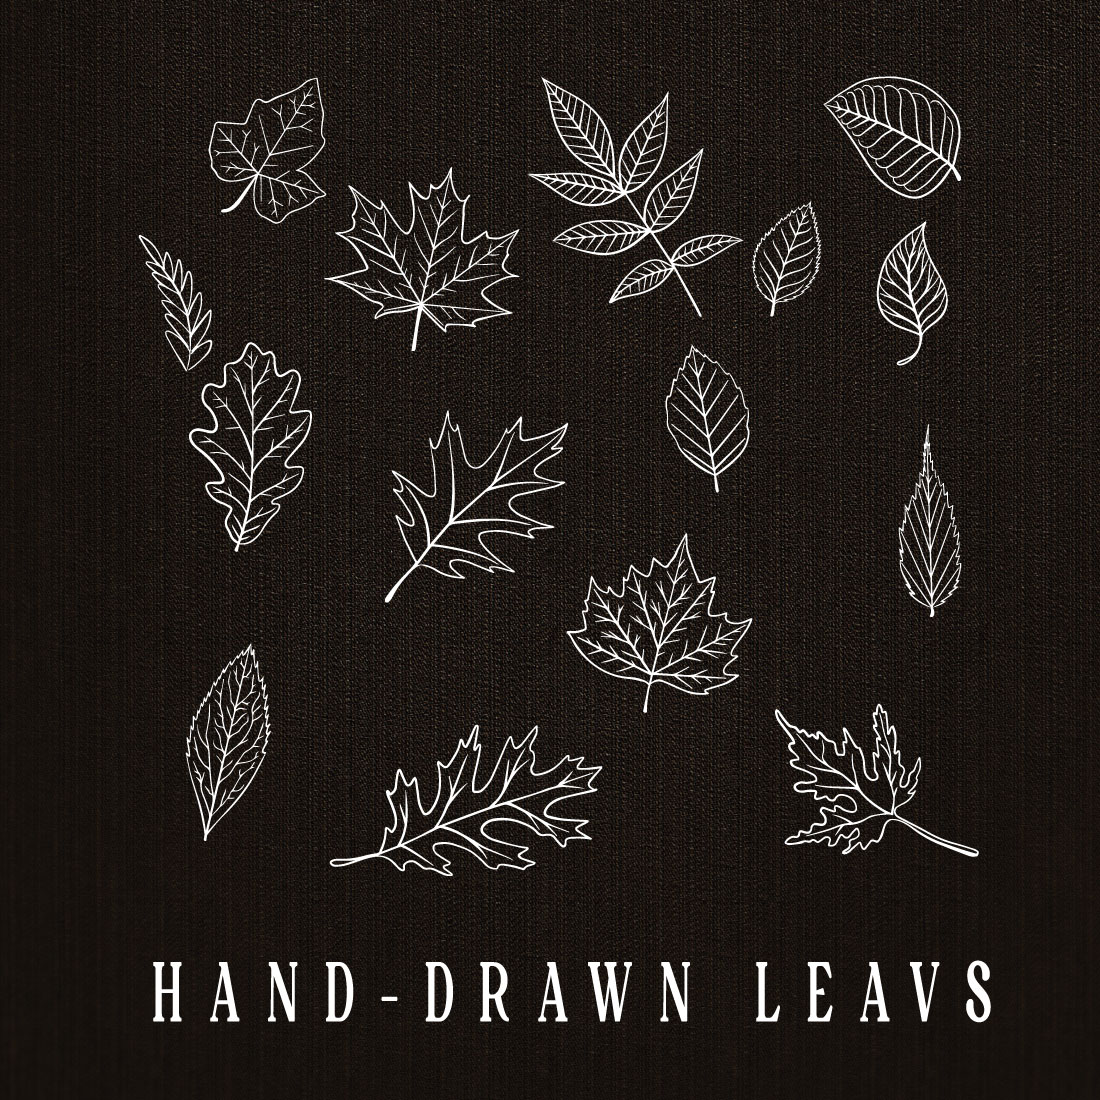 Hand Drawn Elements Vector – Camping and Hiking Elements – Hard Drawn Leaves cover image.